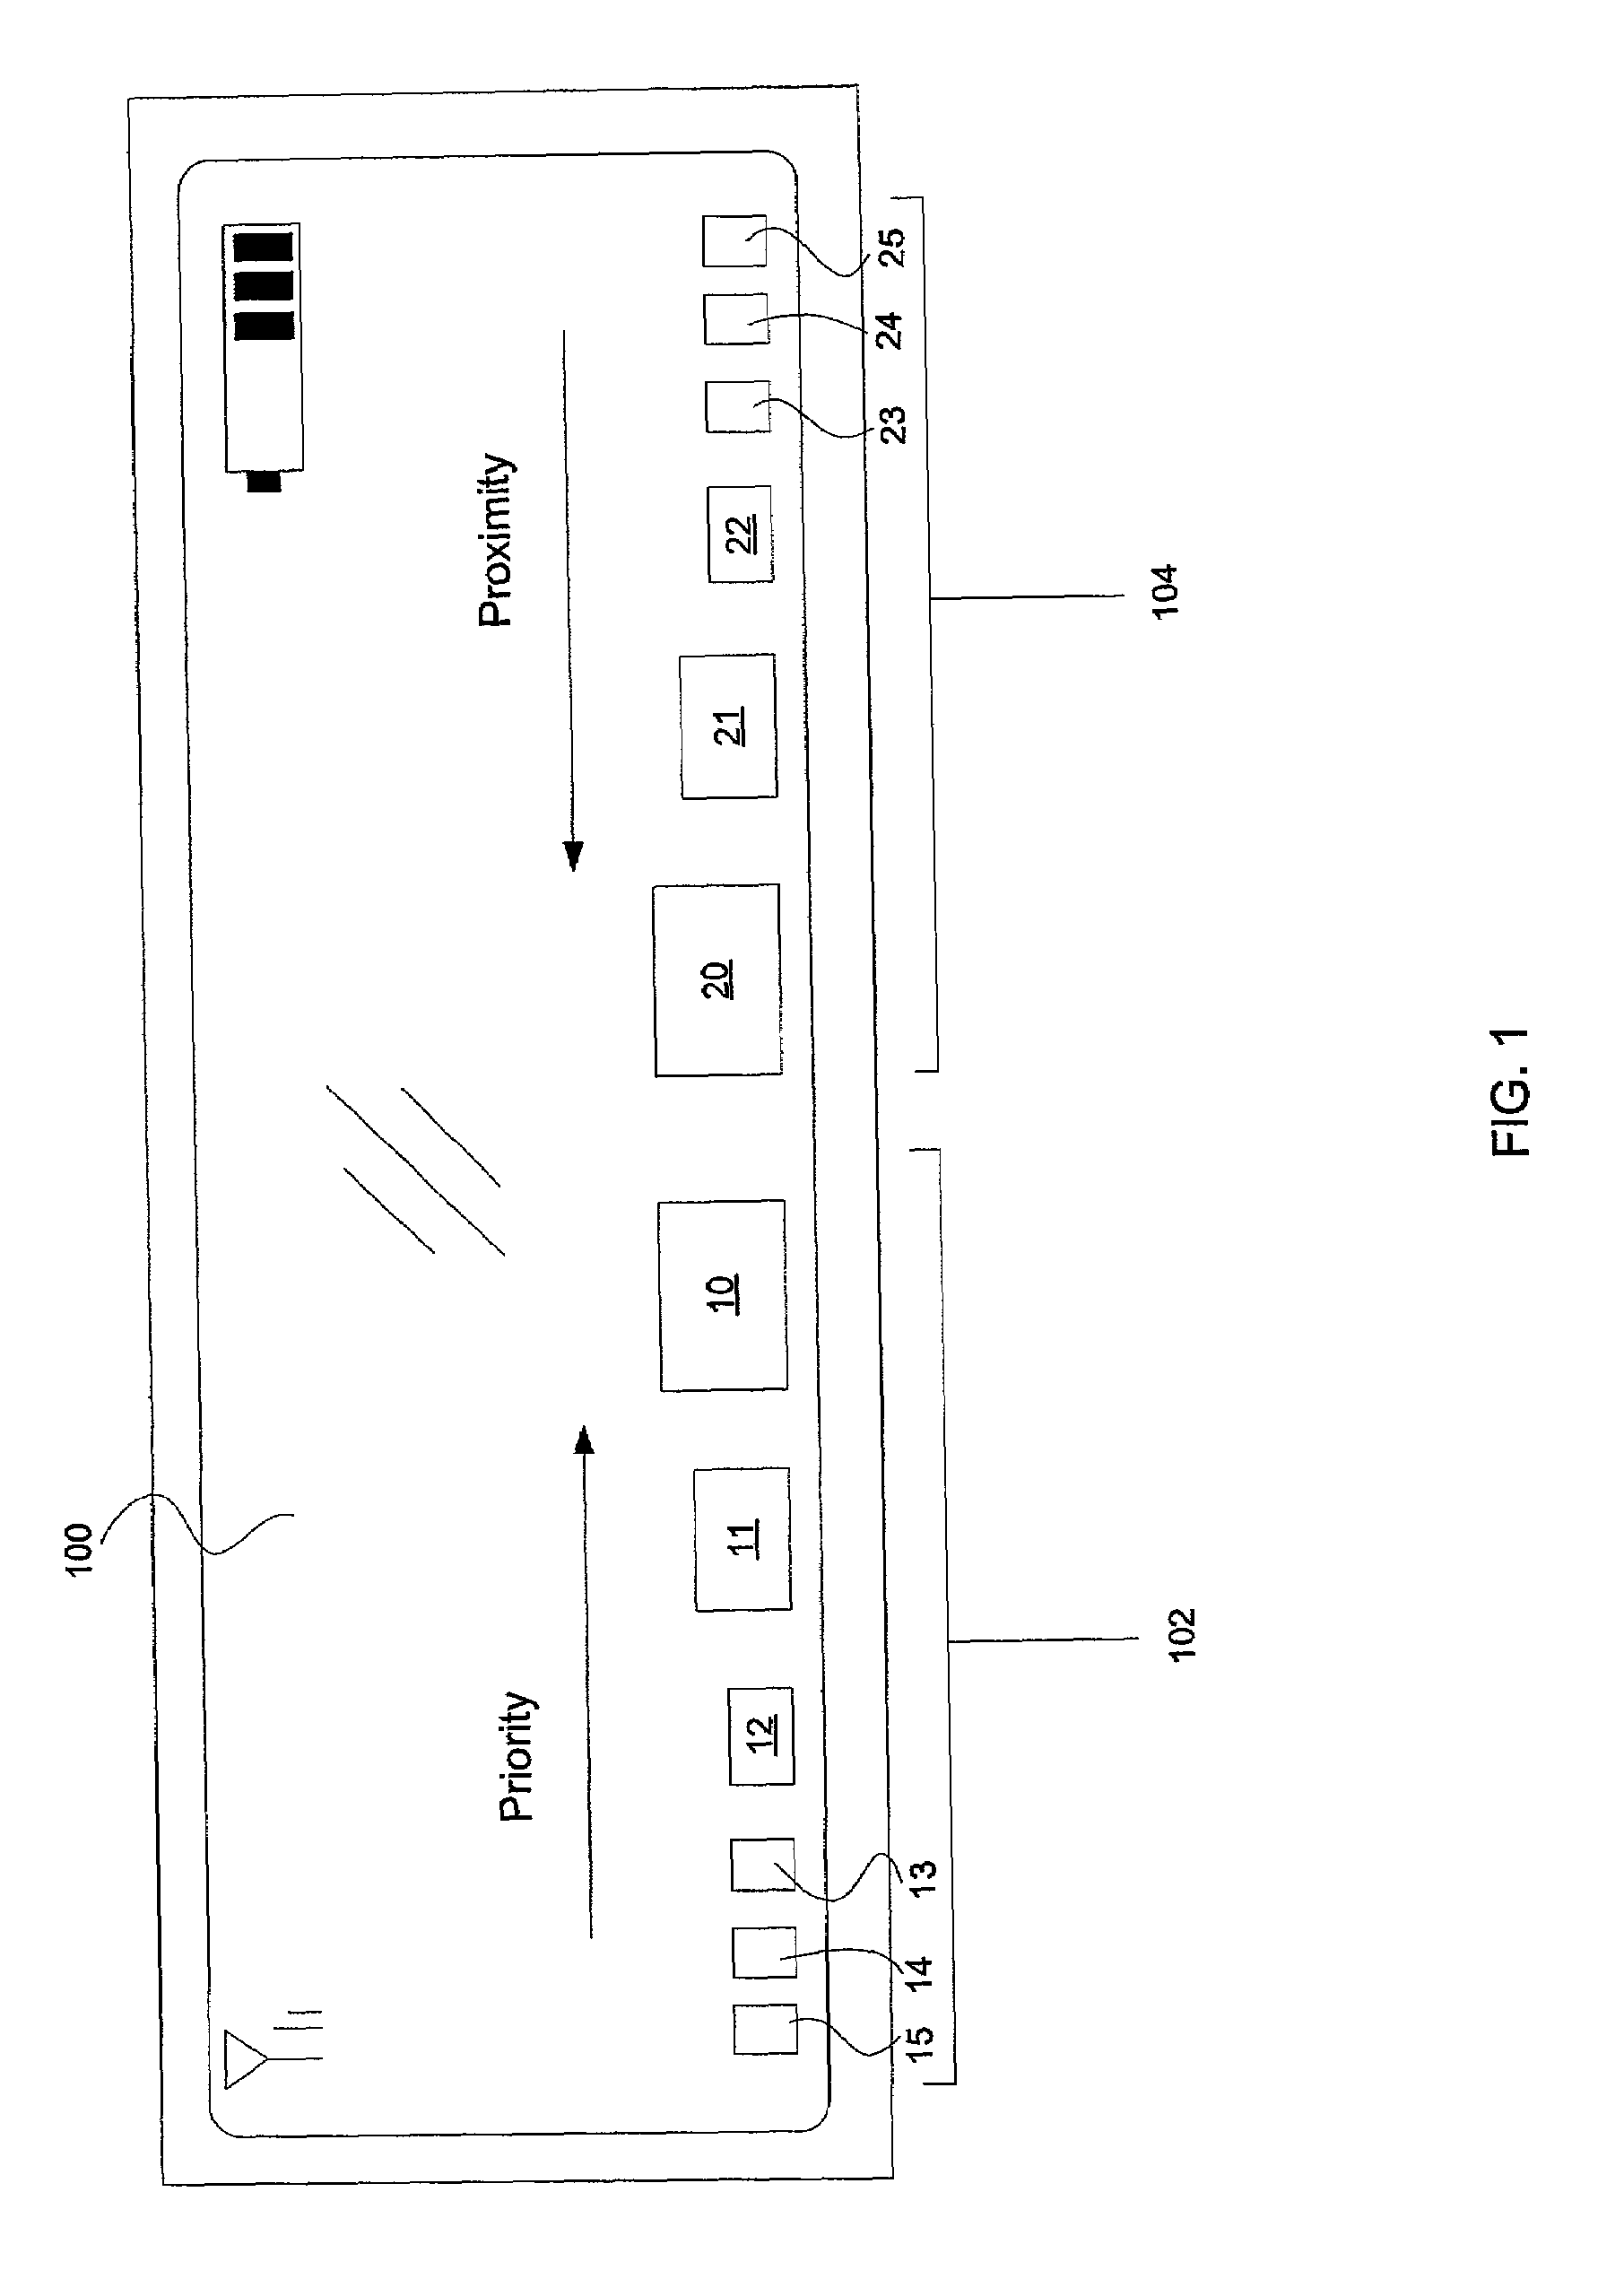 Multilevel sorting and displaying of contextual objects